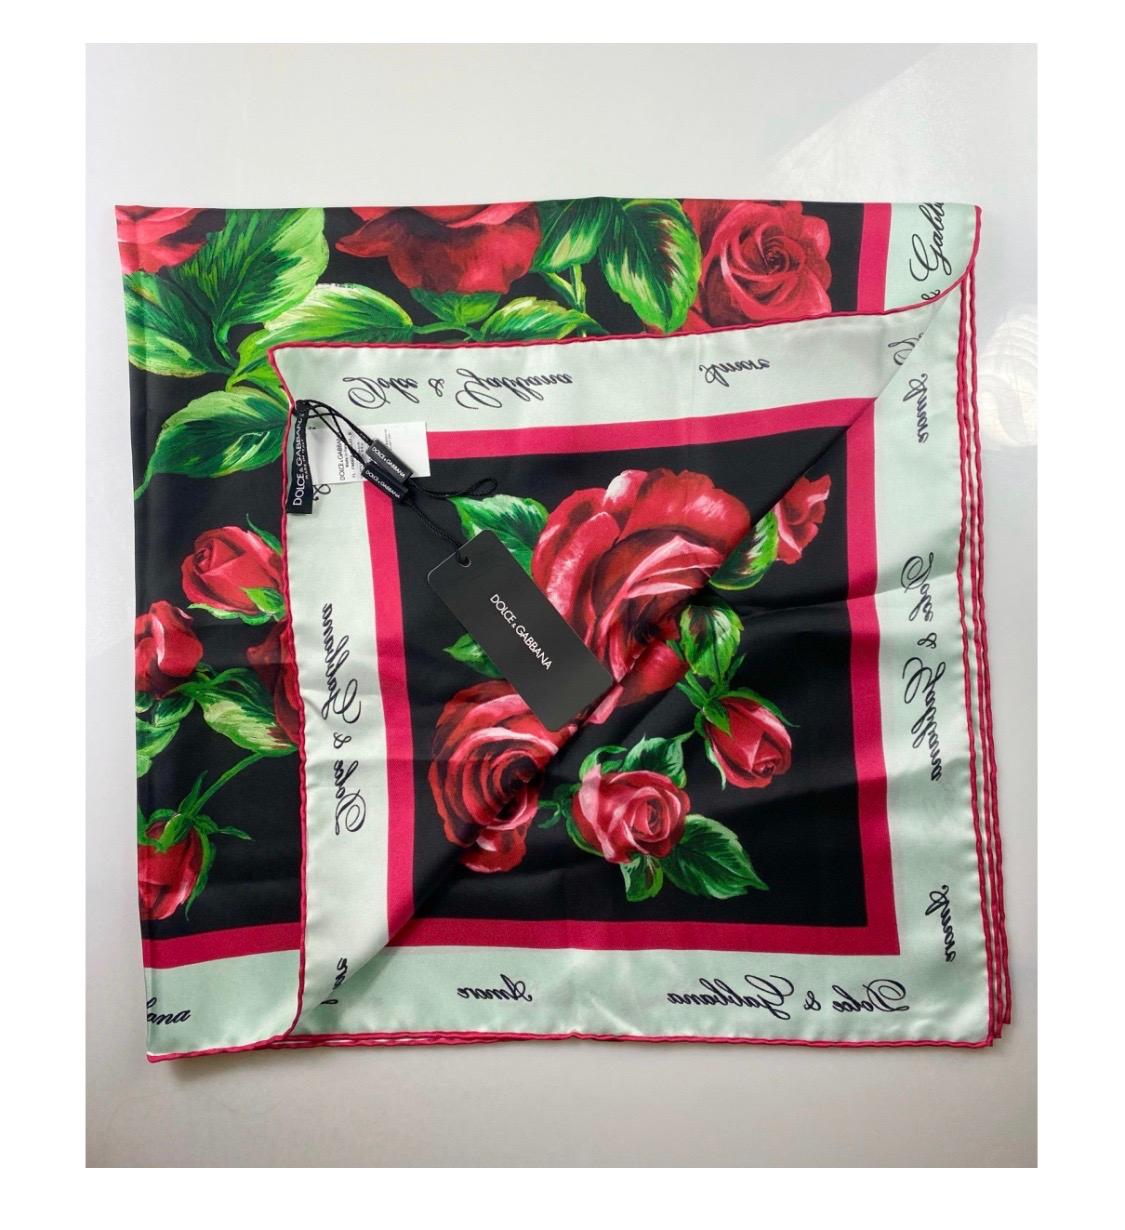 Dolce & Gabbana Red Rose Amore
printed silk large scarf wrap

Size 90cmx90cm

100% silk

Made in Italy

Brand new with tags!

Please check my other DG clothing &
shoes & accessories! 
